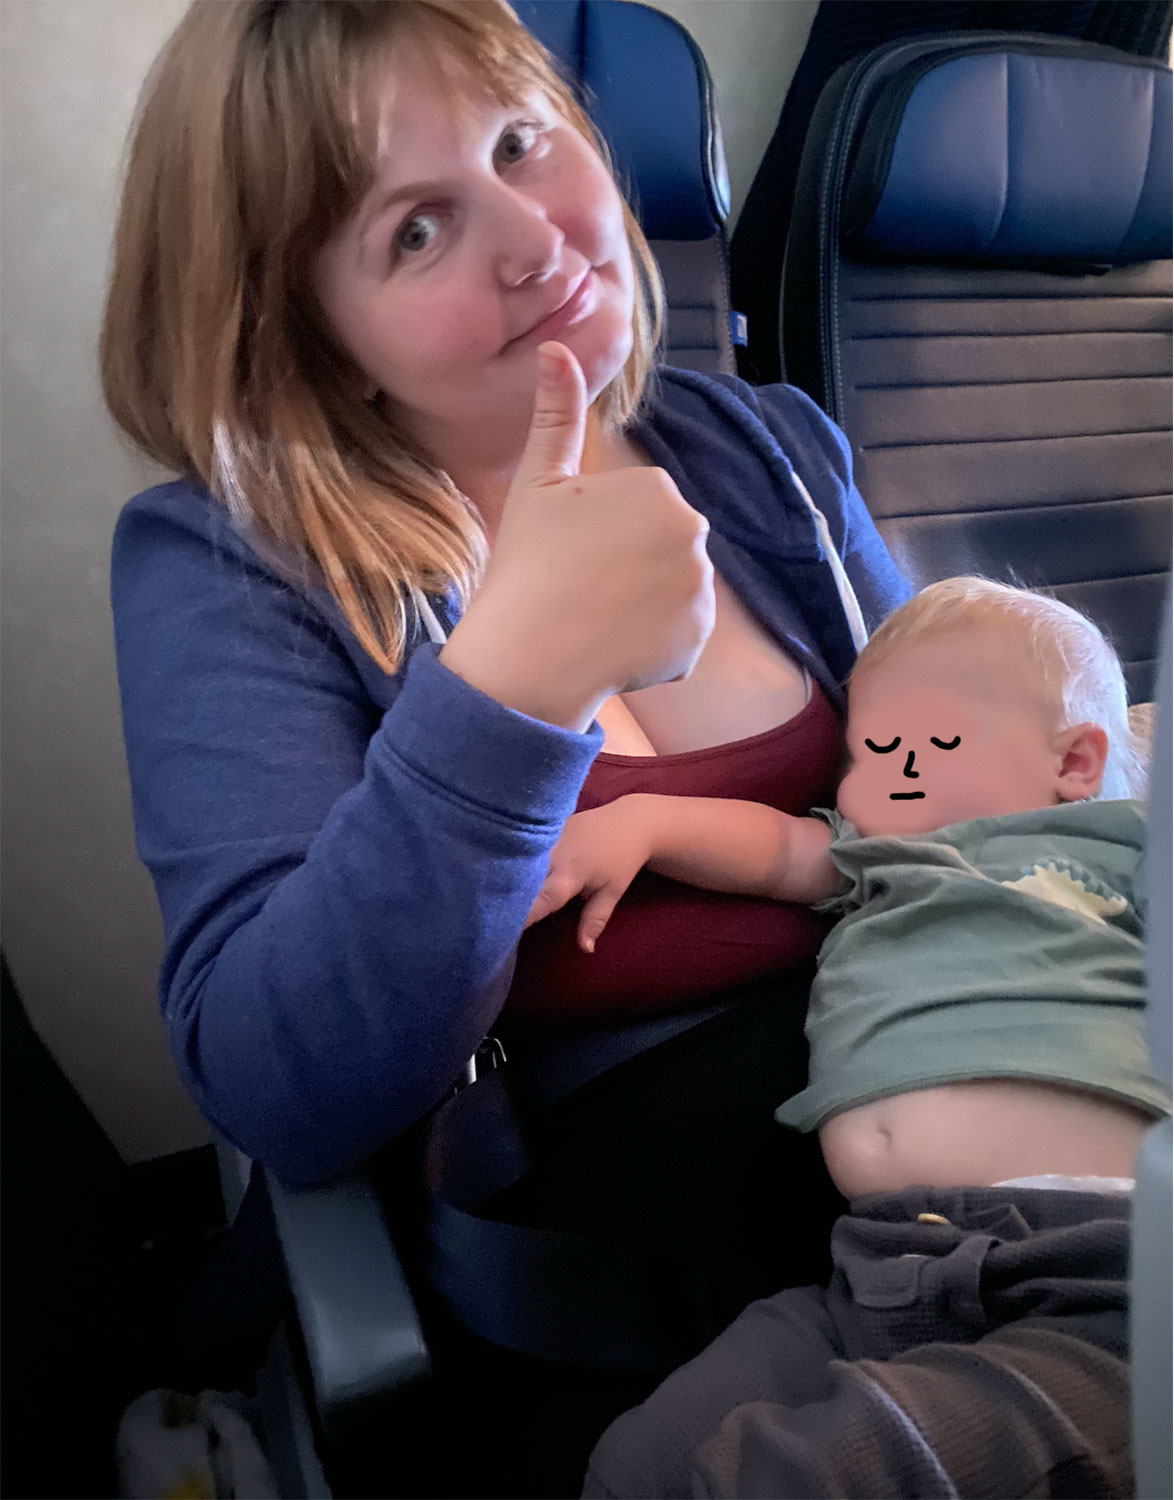 A woman sits on an airplane holding a sleeping baby, giving a thumbs up to the camera